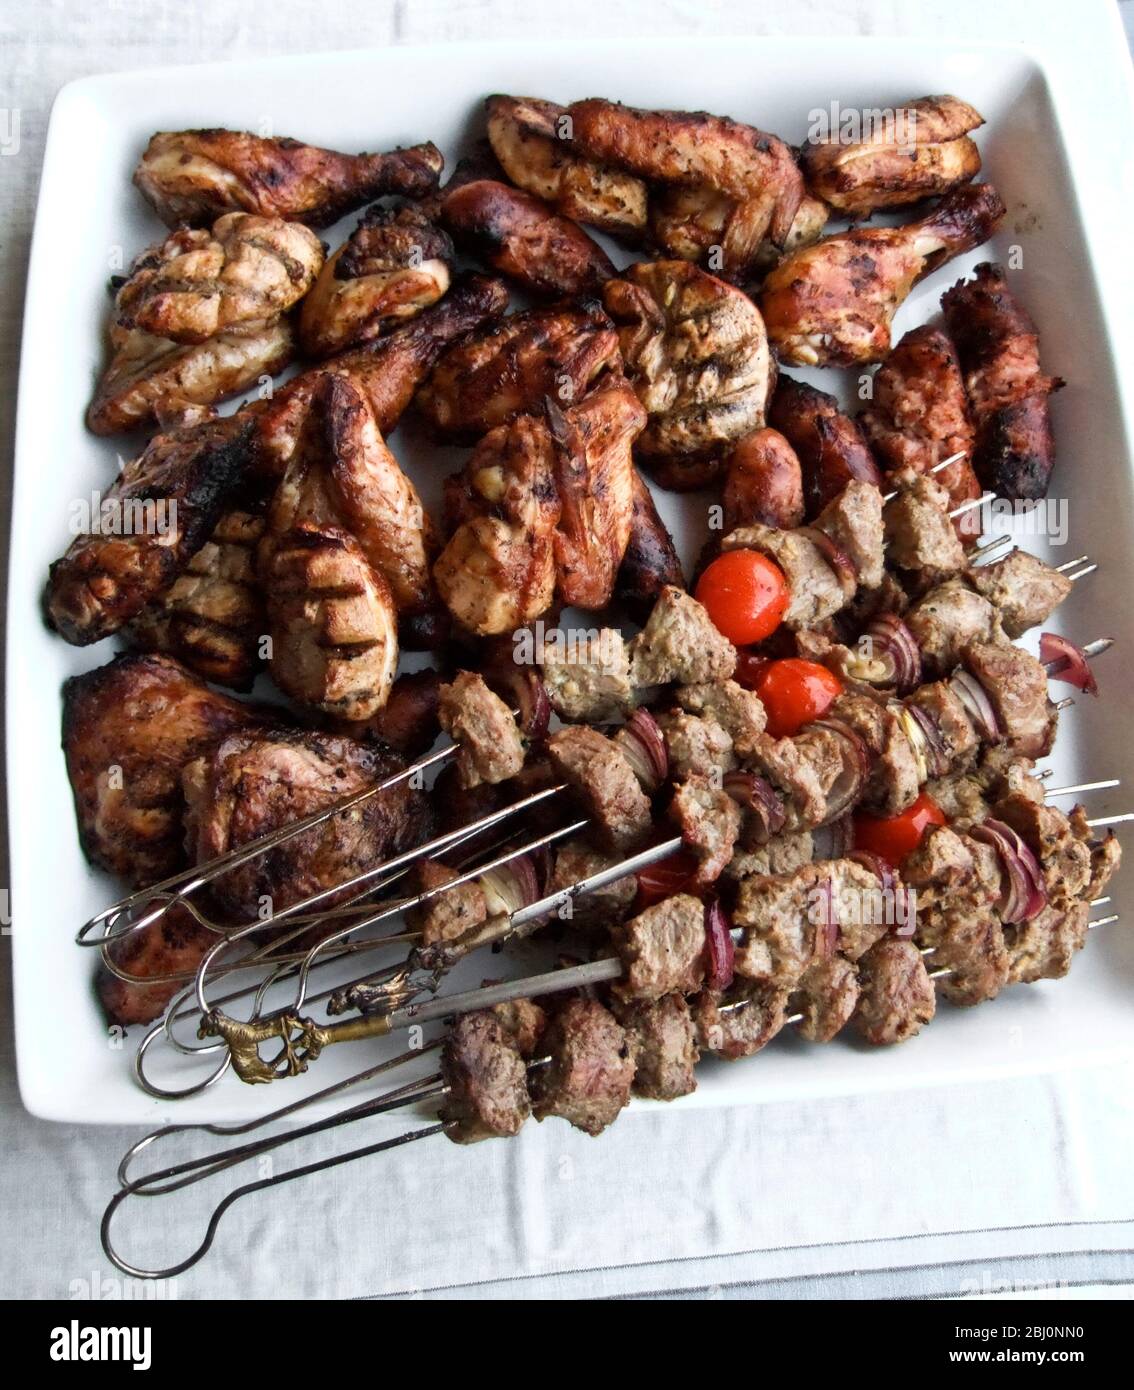 A variety of mixed meats and kebabs fresh from the barbecue - Stock Photo